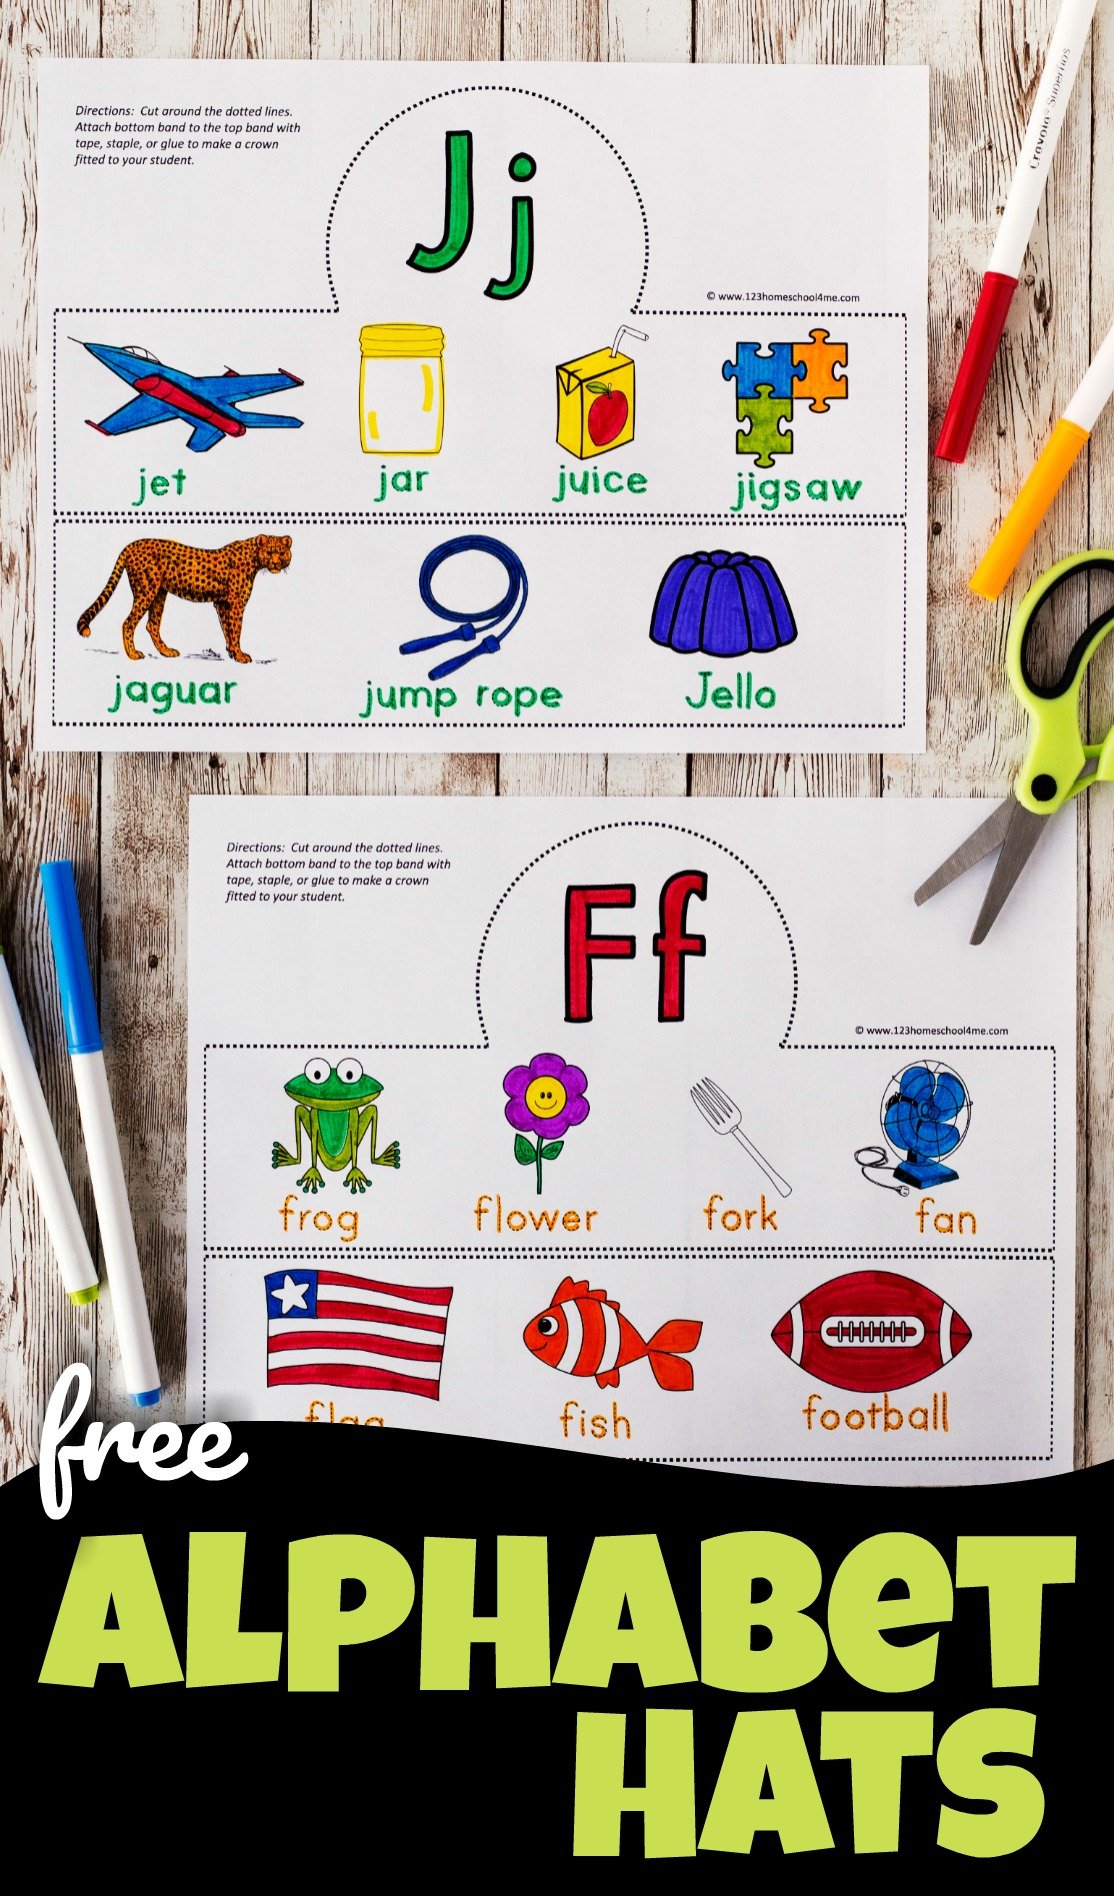 FREE Printable Alphabet Hats Craft for Learning Letters